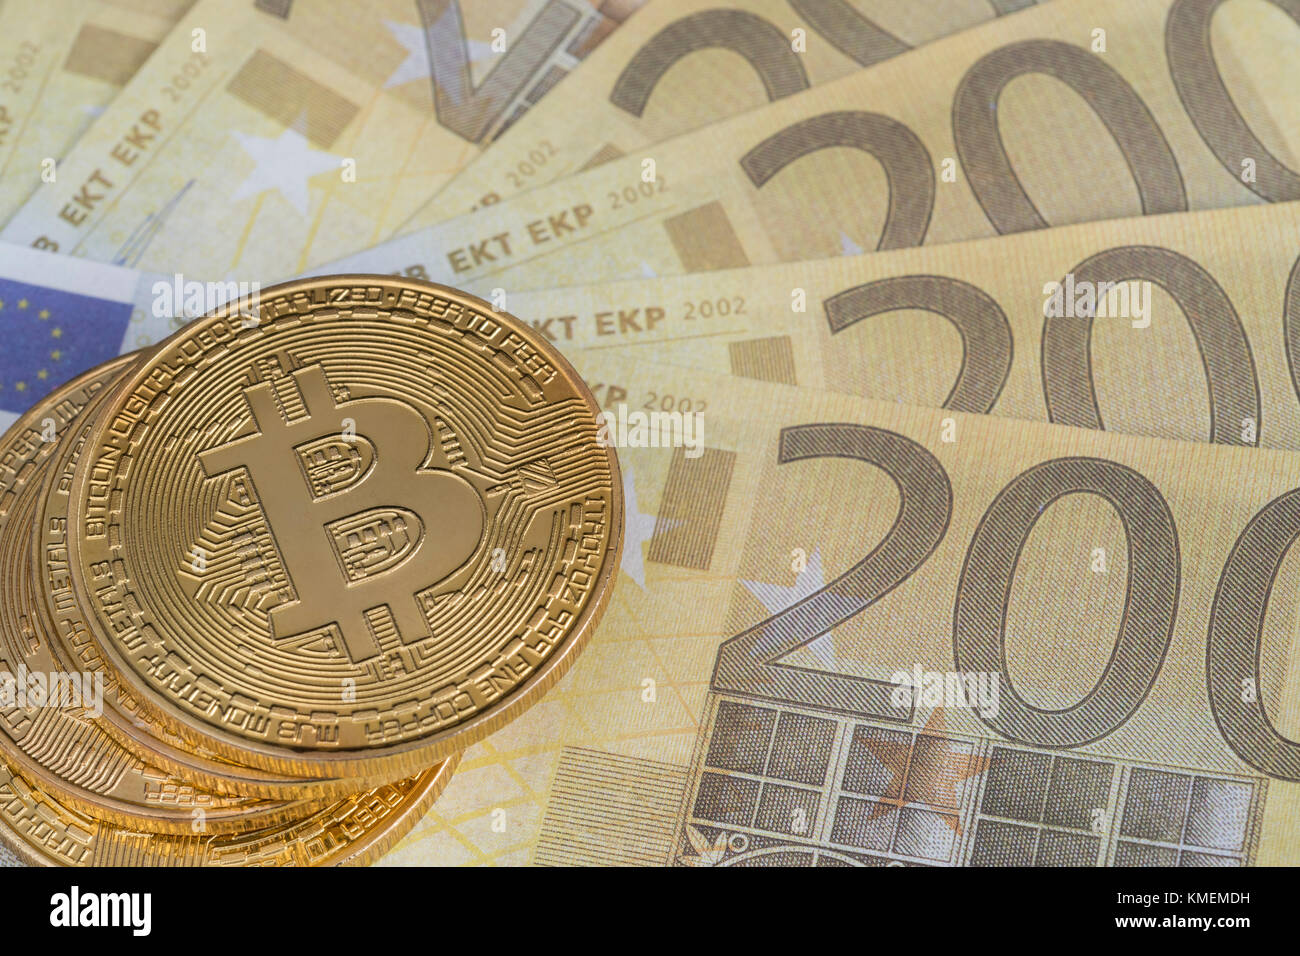 Gold-colored Bitcoin cryptocurrency with 200 Euro banknotes - Bitcoin values reaching high levels in December 2017. Stock Photo